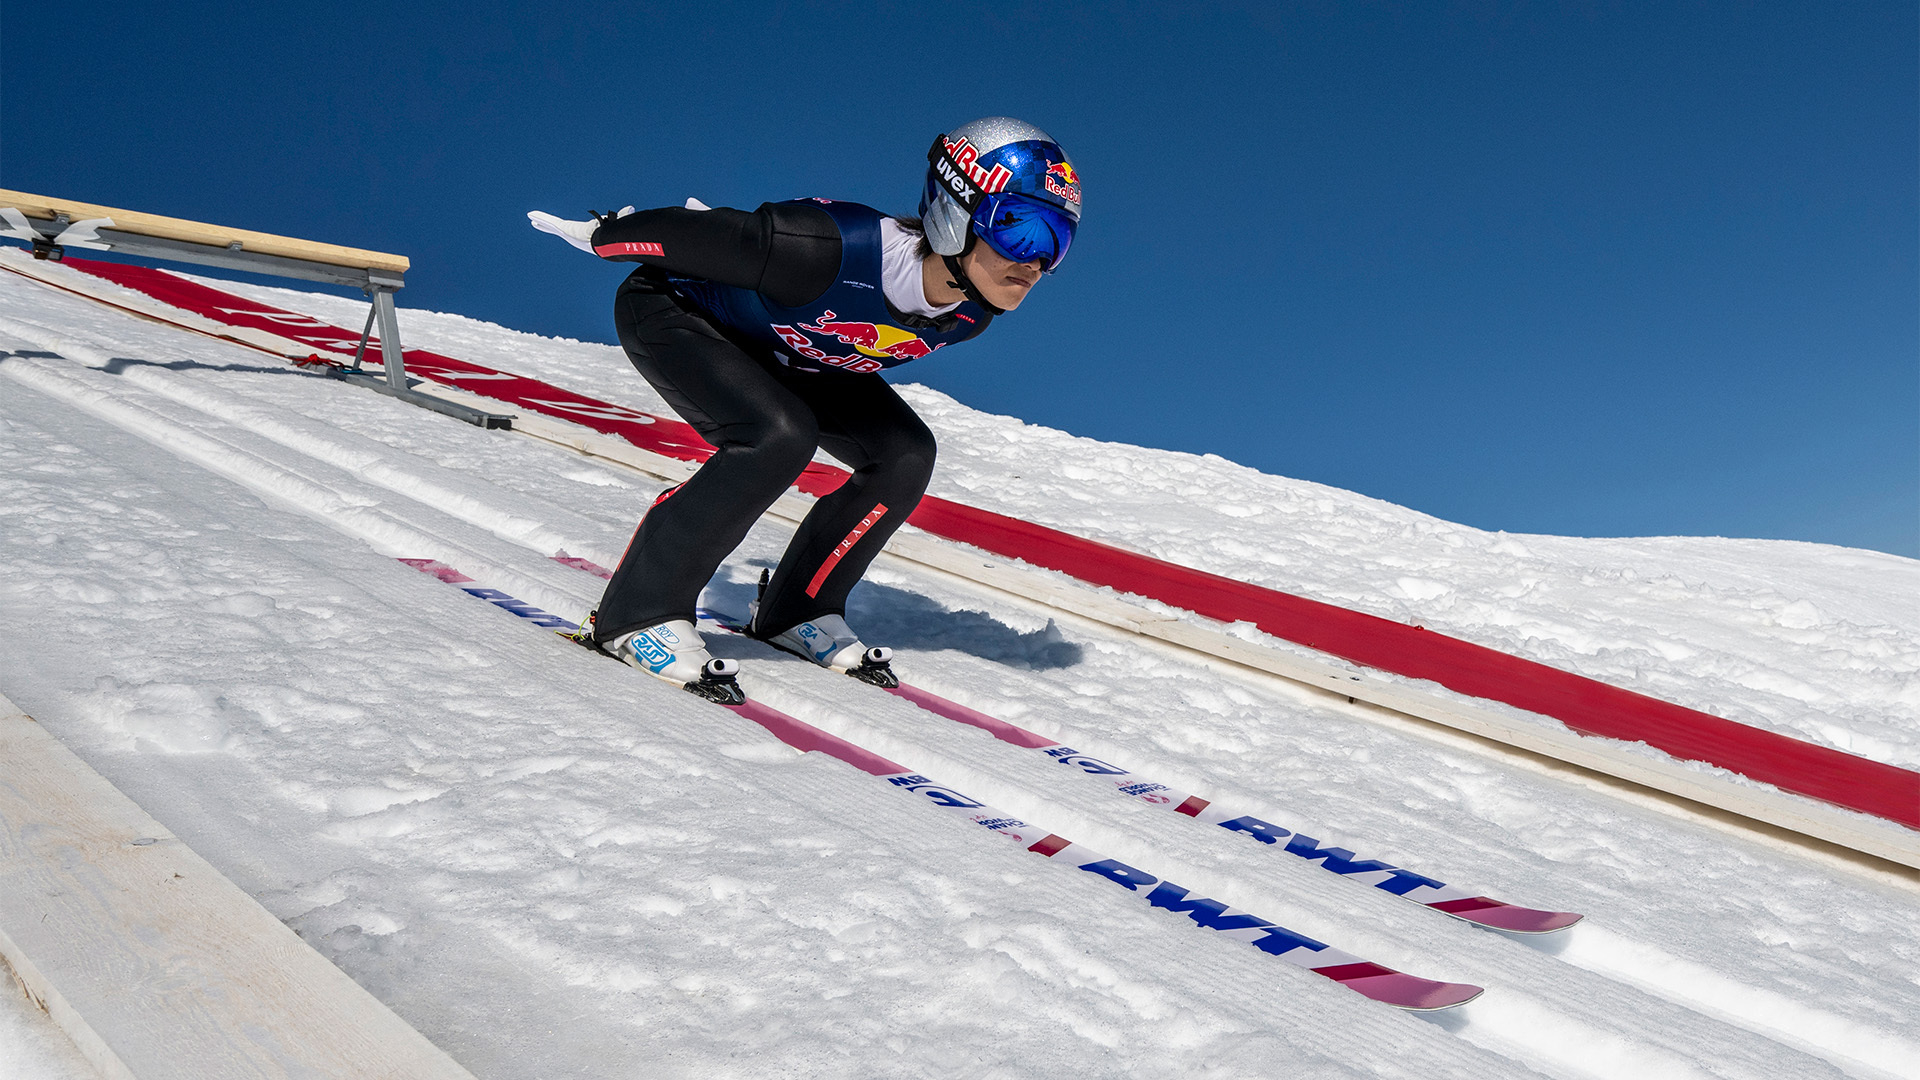 A ski jumper mid-jump wearing a helmet, goggles, and suit with sponsors&#x27; logos, focusing intently on the descent